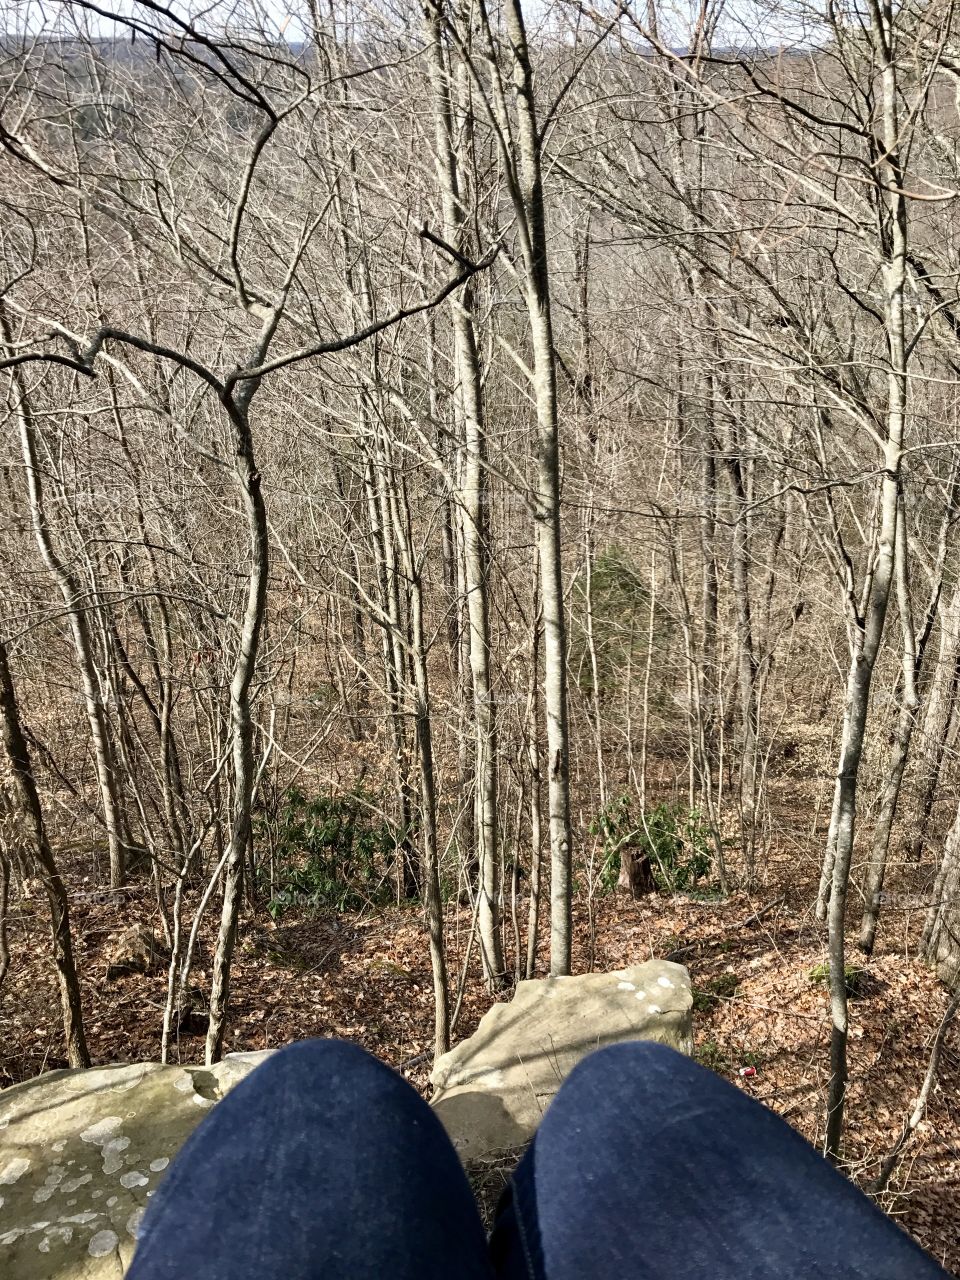 The knees of a girl sitting on a ledge looking into a Kentucky forest in early spring 